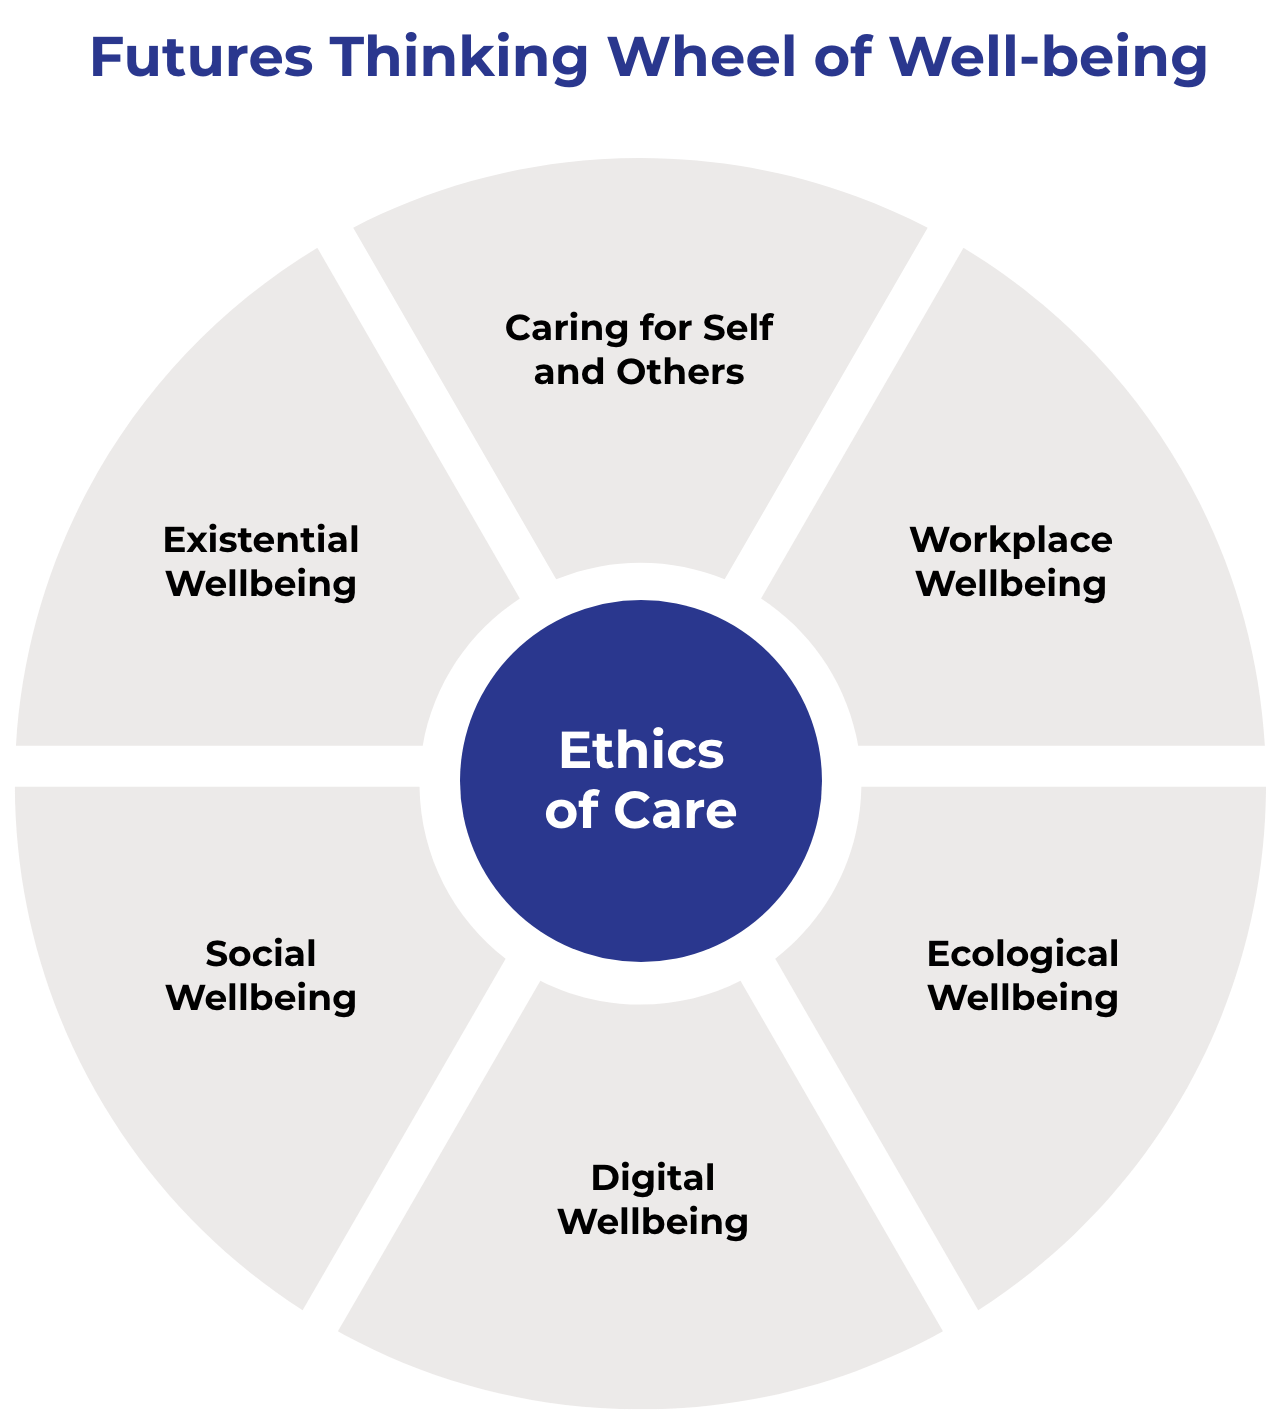 Futures Thinking Wheel of Well-Being: Centering Well-Being around Ethics of Care, the Wheel helps coaches think about domains of well-being including: care for self and others, workplace wellbeing, ecological wellbeing, digital wellbeing, social wellbeing, and existential wellbeing. 